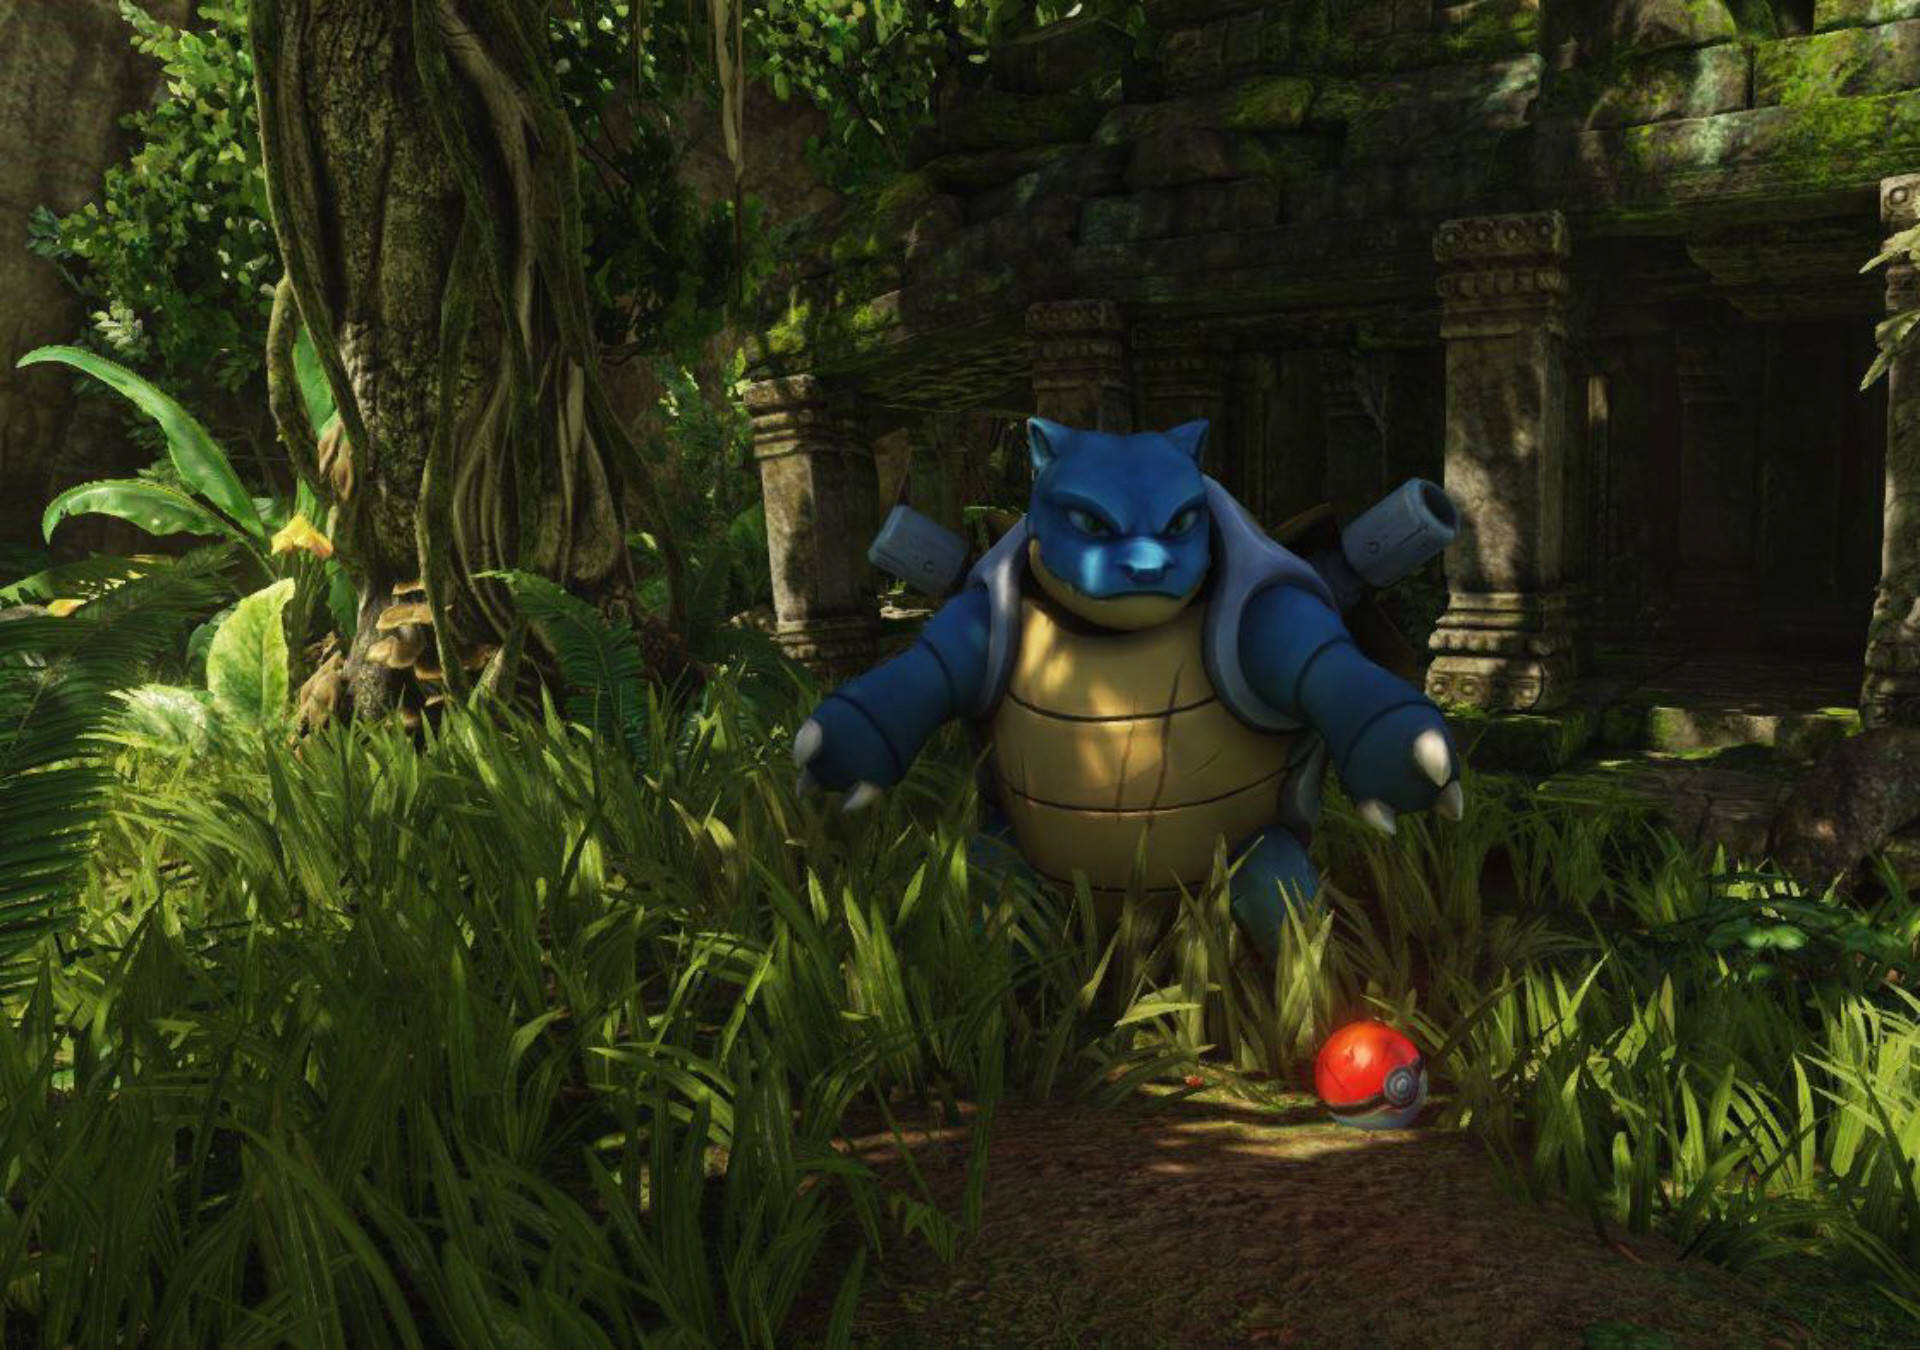 Blastoise, A Powerful And Majestic Pokémon, Proudly Stands In A Lush Jungle. Background